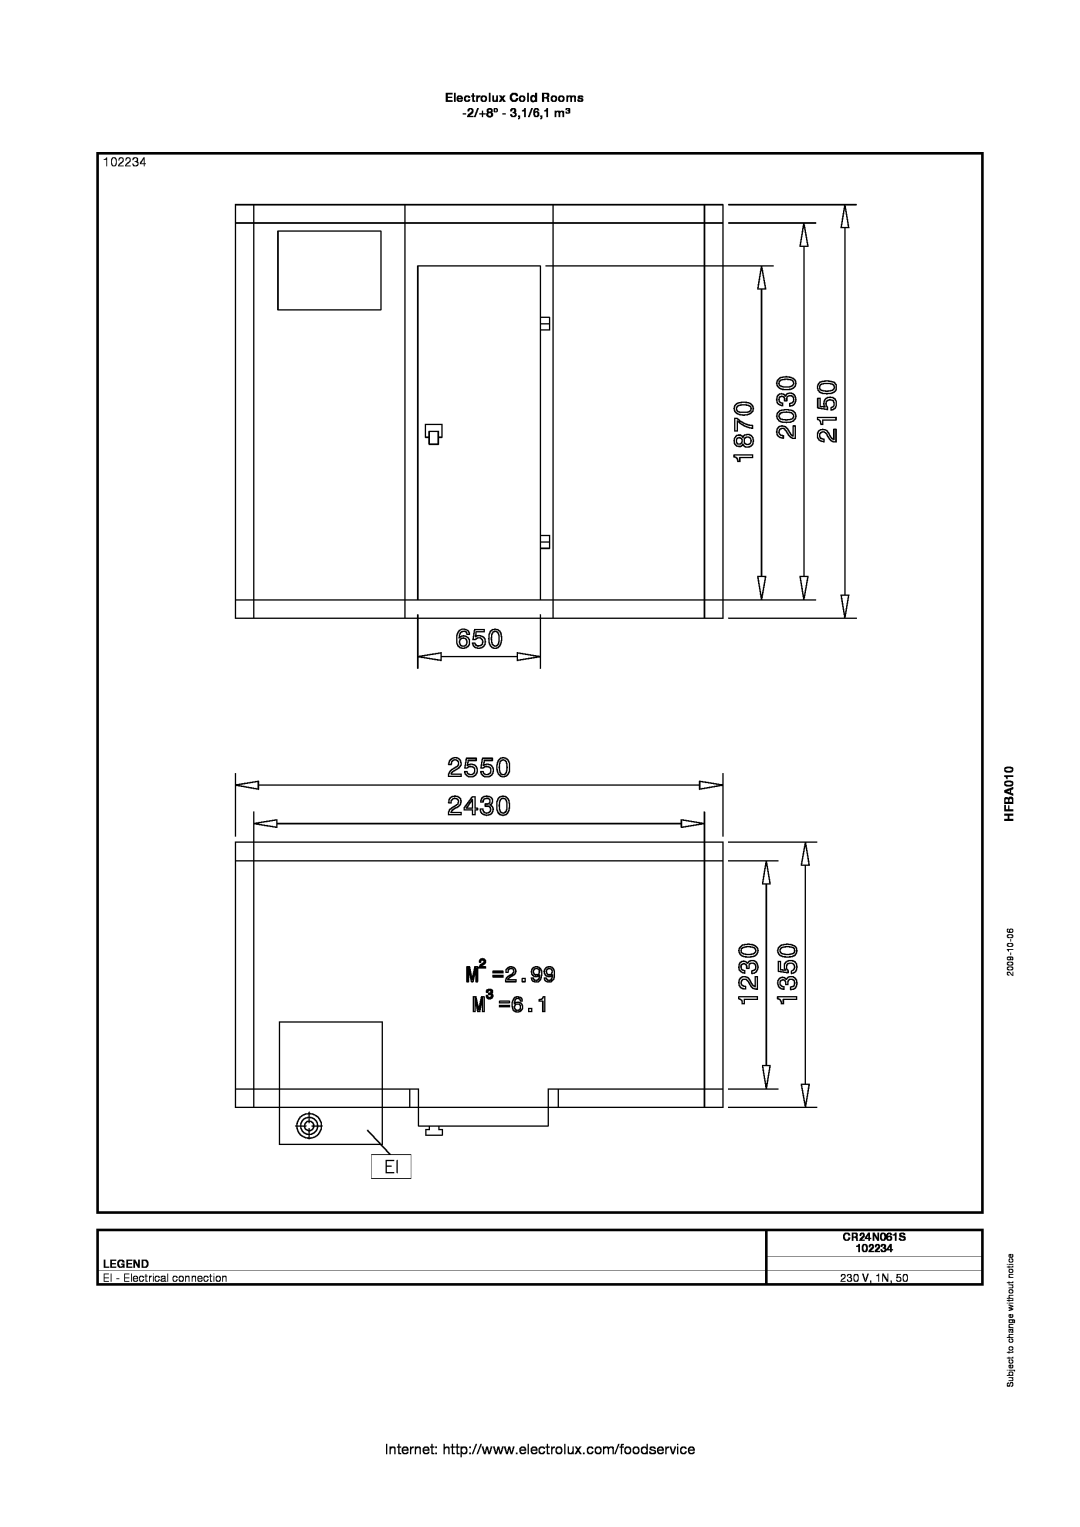 Electrolux 102028 manual 102234, Electrolux Cold Rooms -2/+8º - 3,1/6,1 m³, HFBA010, CR24N061S, EI - Electrical connection 